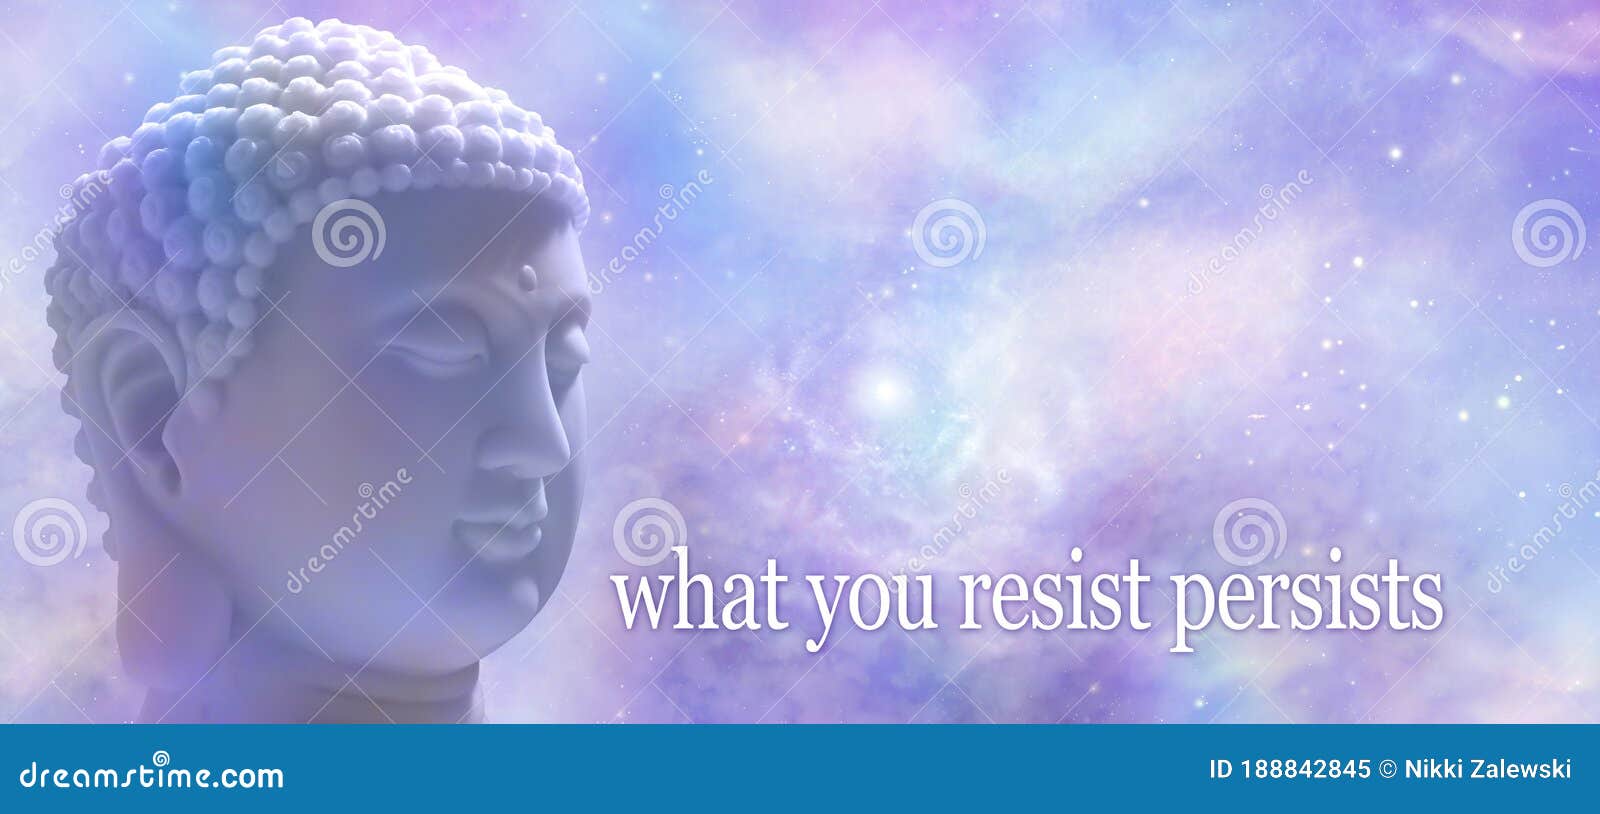 what you resist persists buddhism celestial background